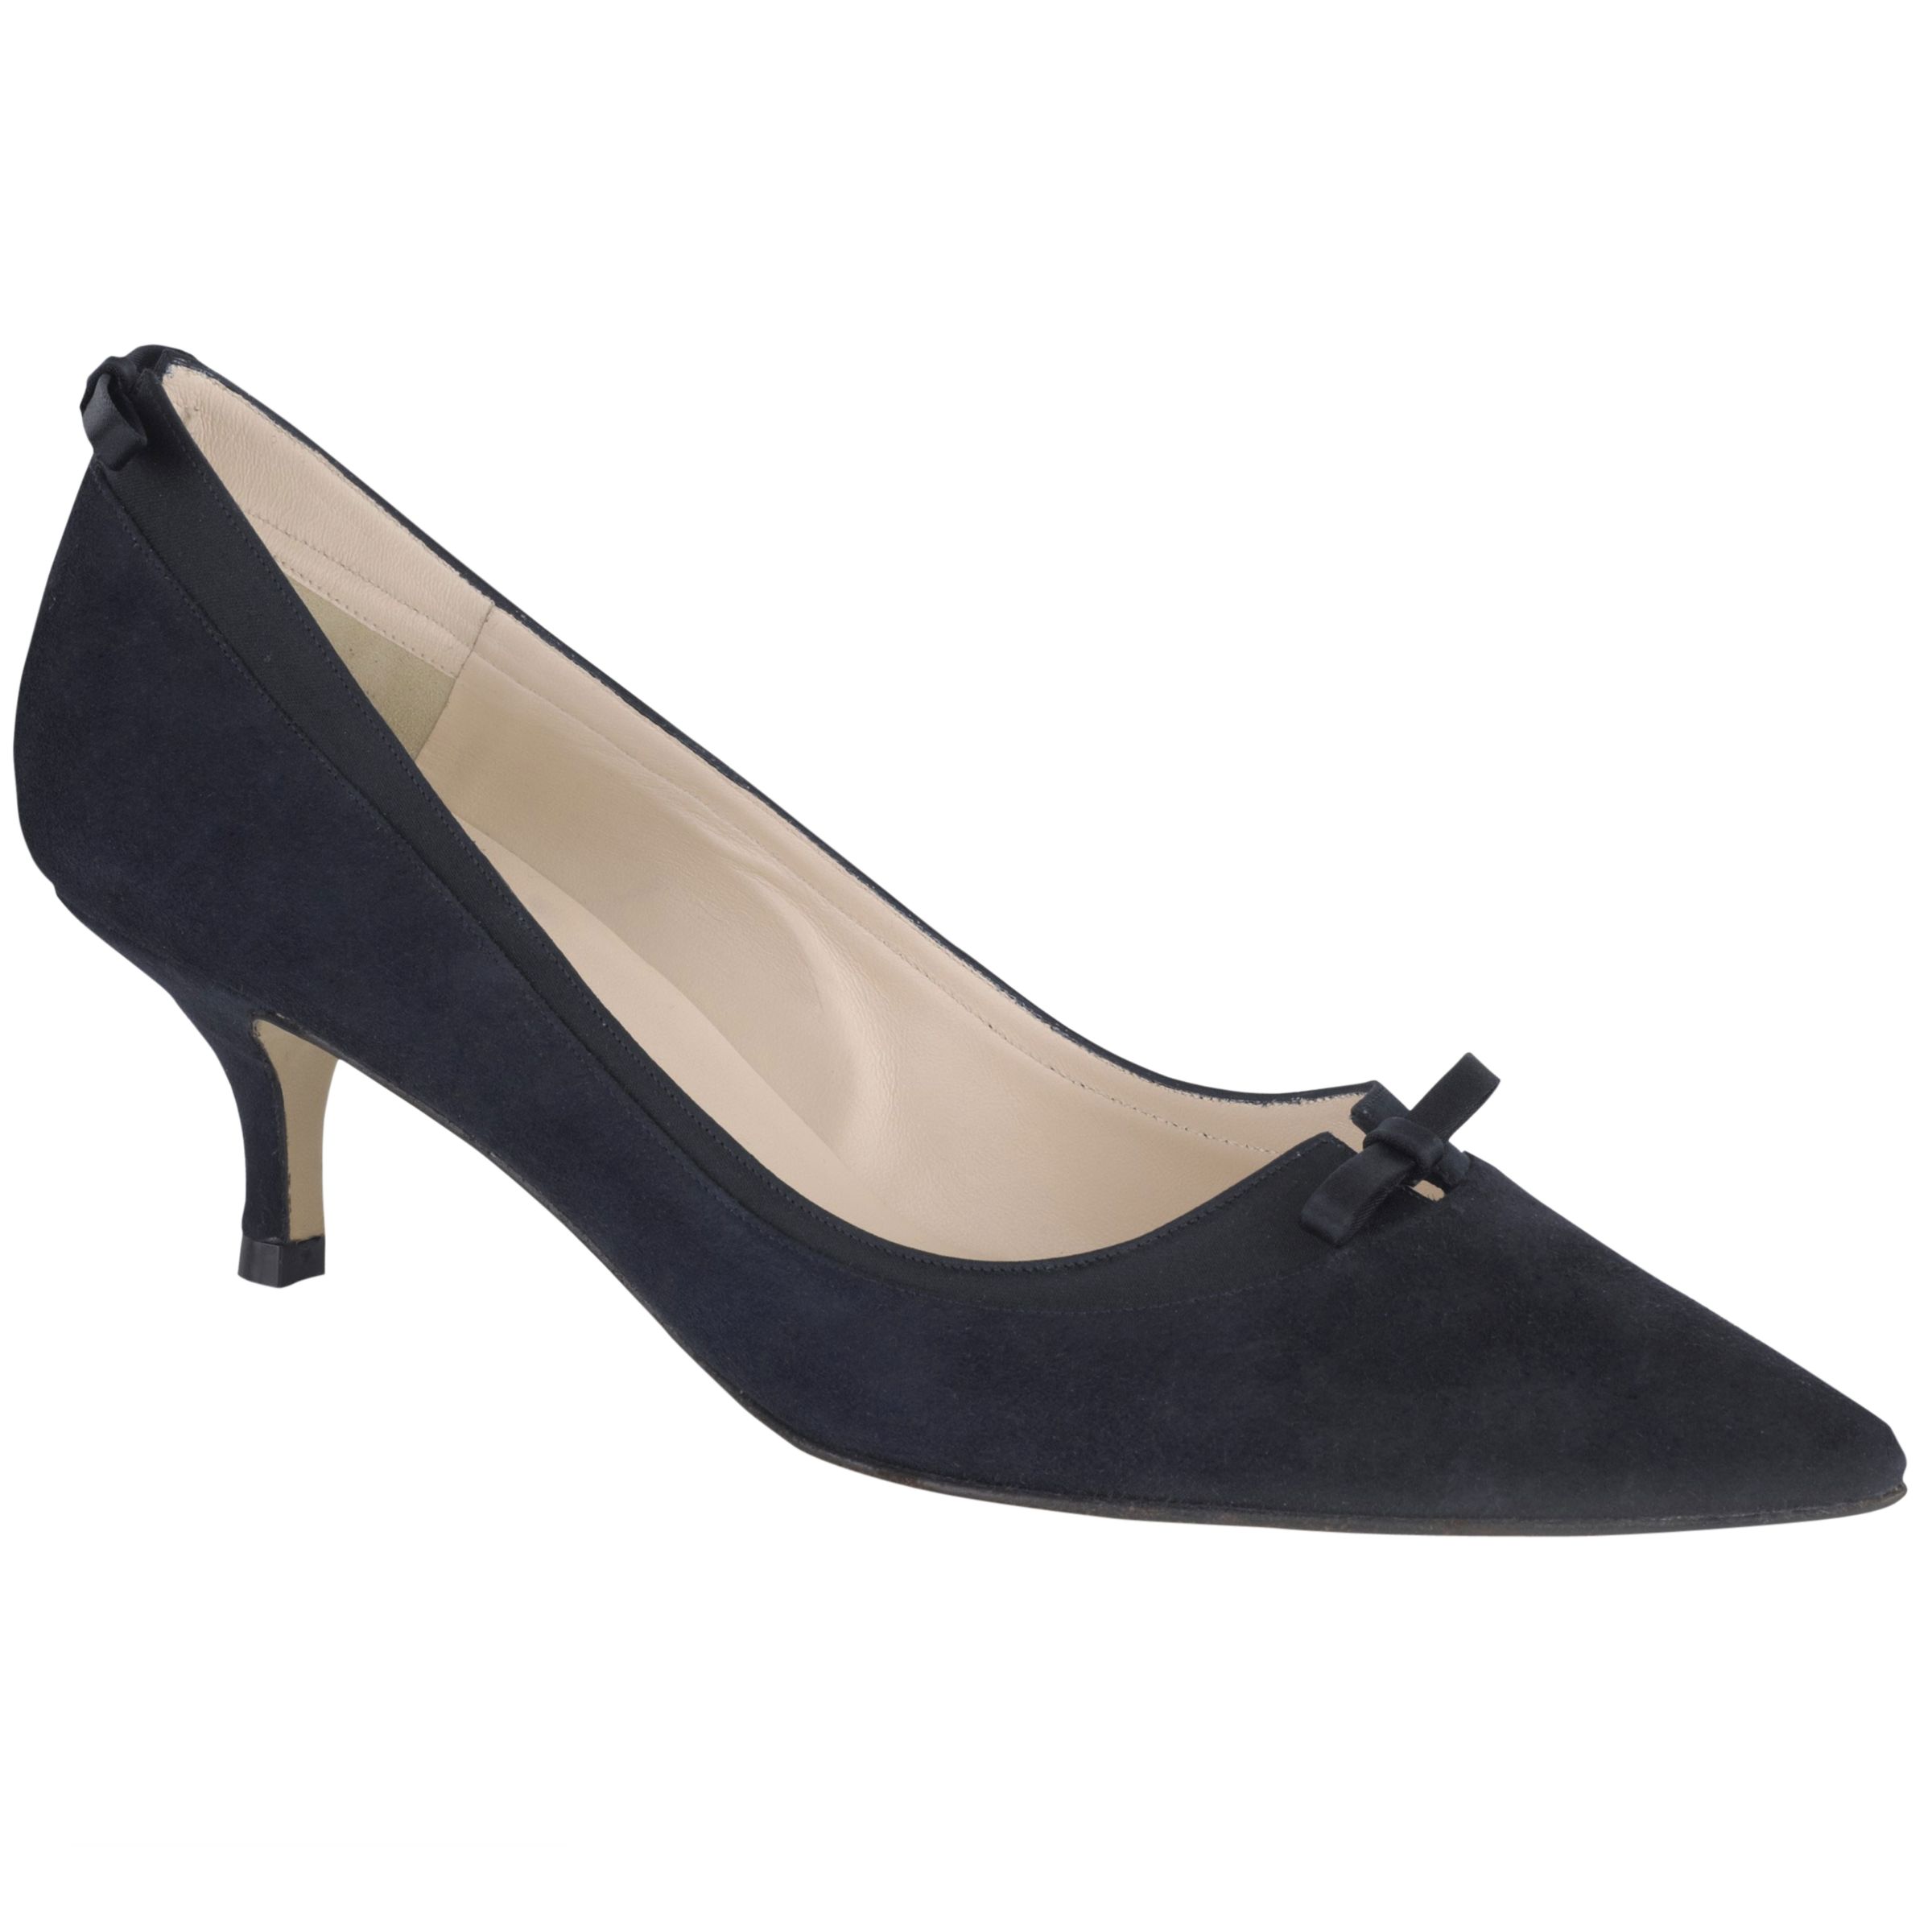 L.K.Bennett Phoebe Suede Court Shoes, Navy at JohnLewis